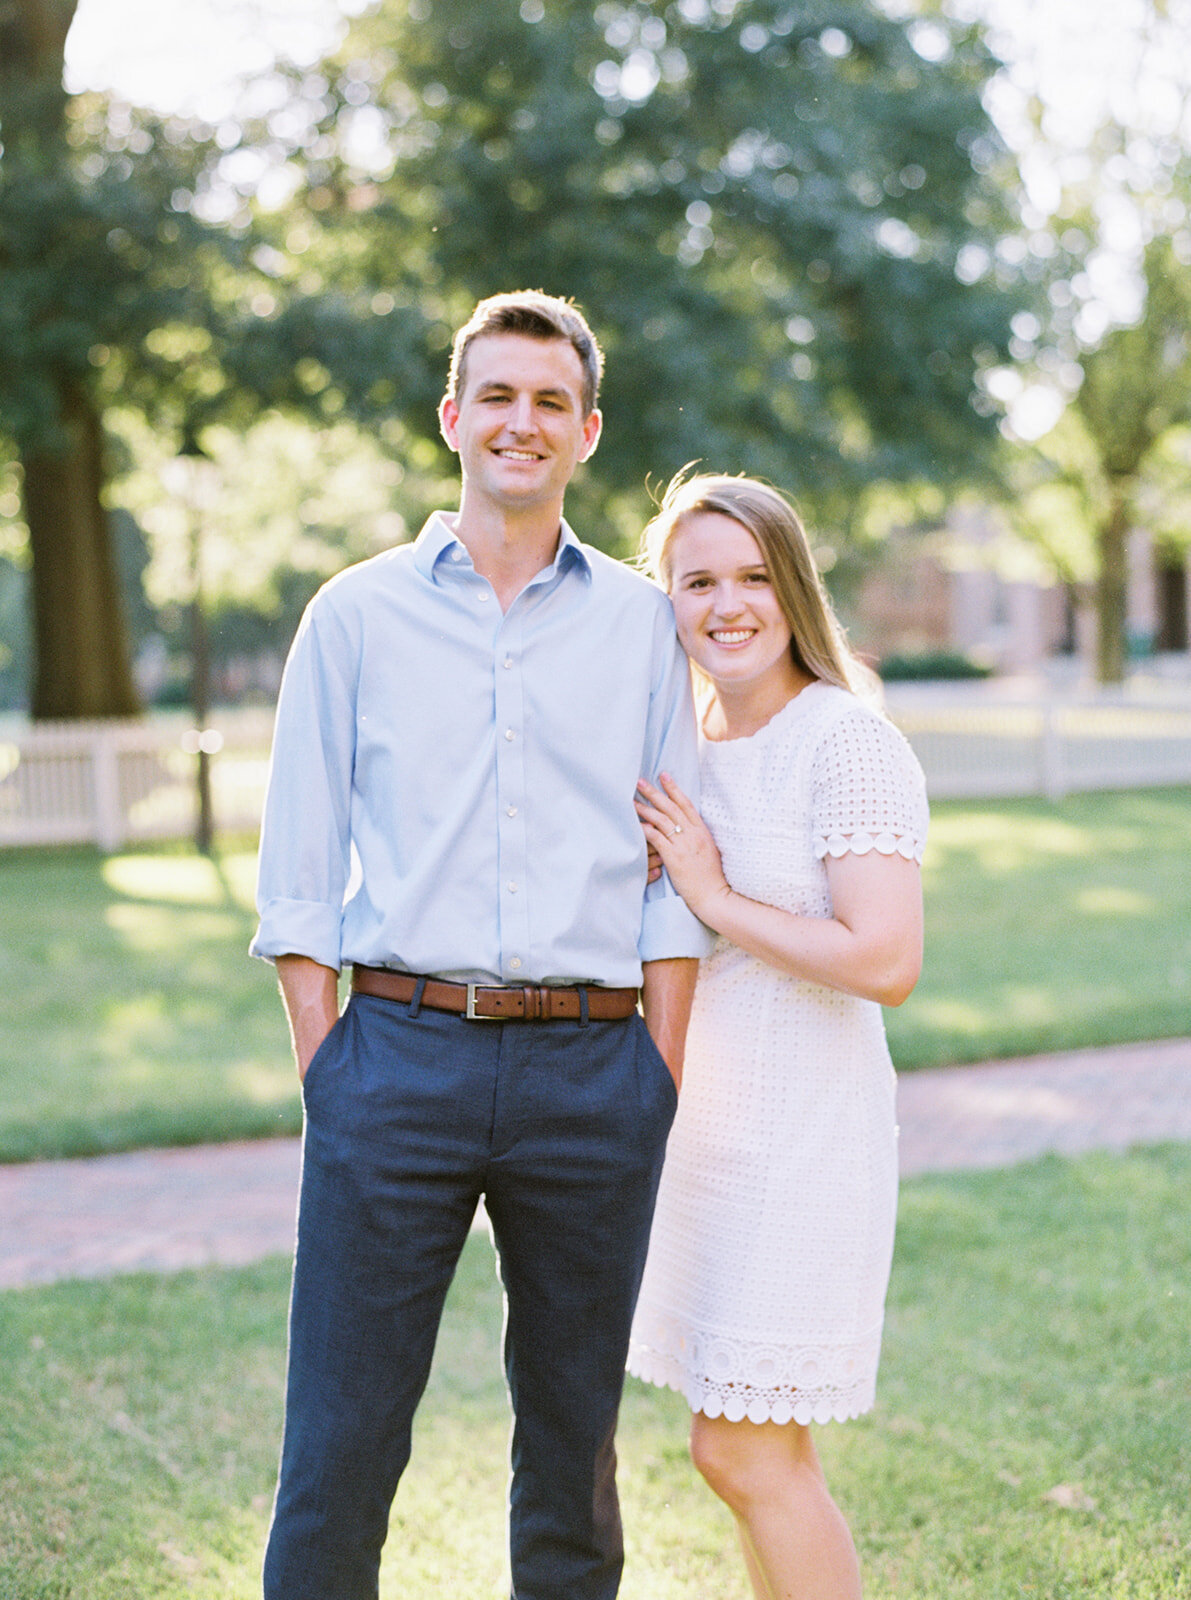 Klaire-Dixius-Photography-William-And-Mary-Williamsburg-Virginia-Engagement-Session-Zach-Meg21